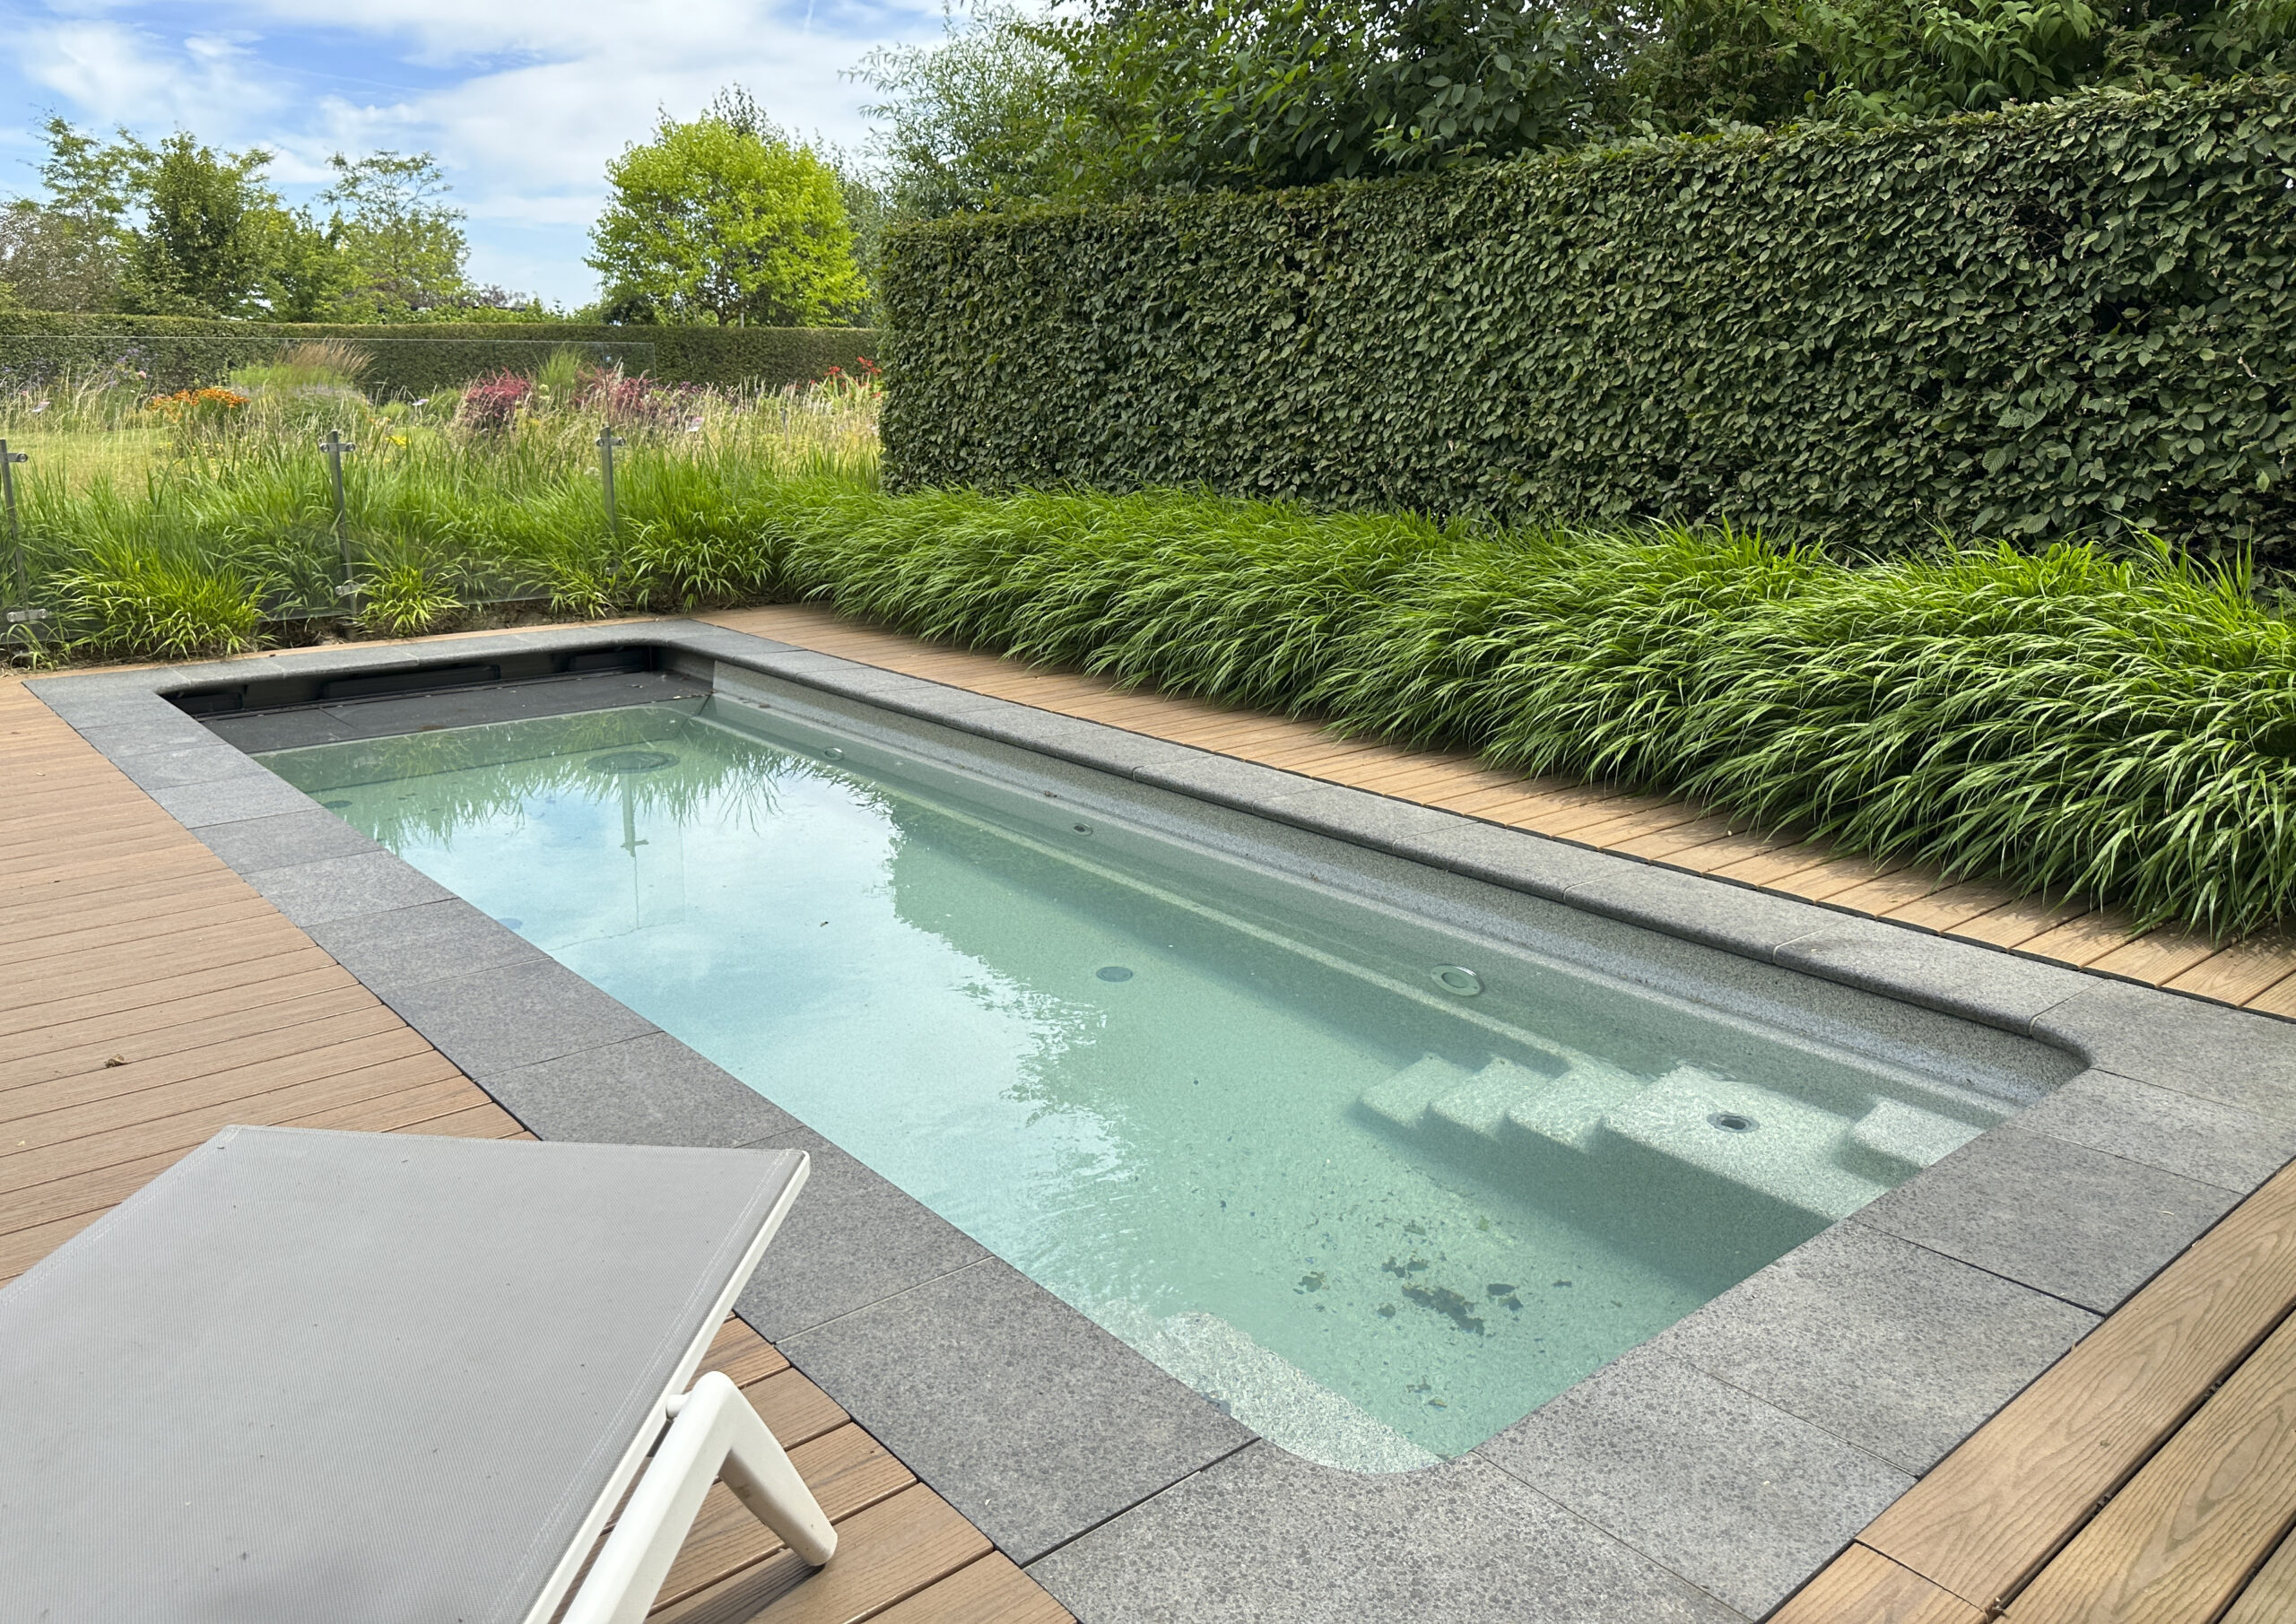 A small rectangular pool, providing a compact and clean design for aquatic relaxation and enjoyment in a limited space.